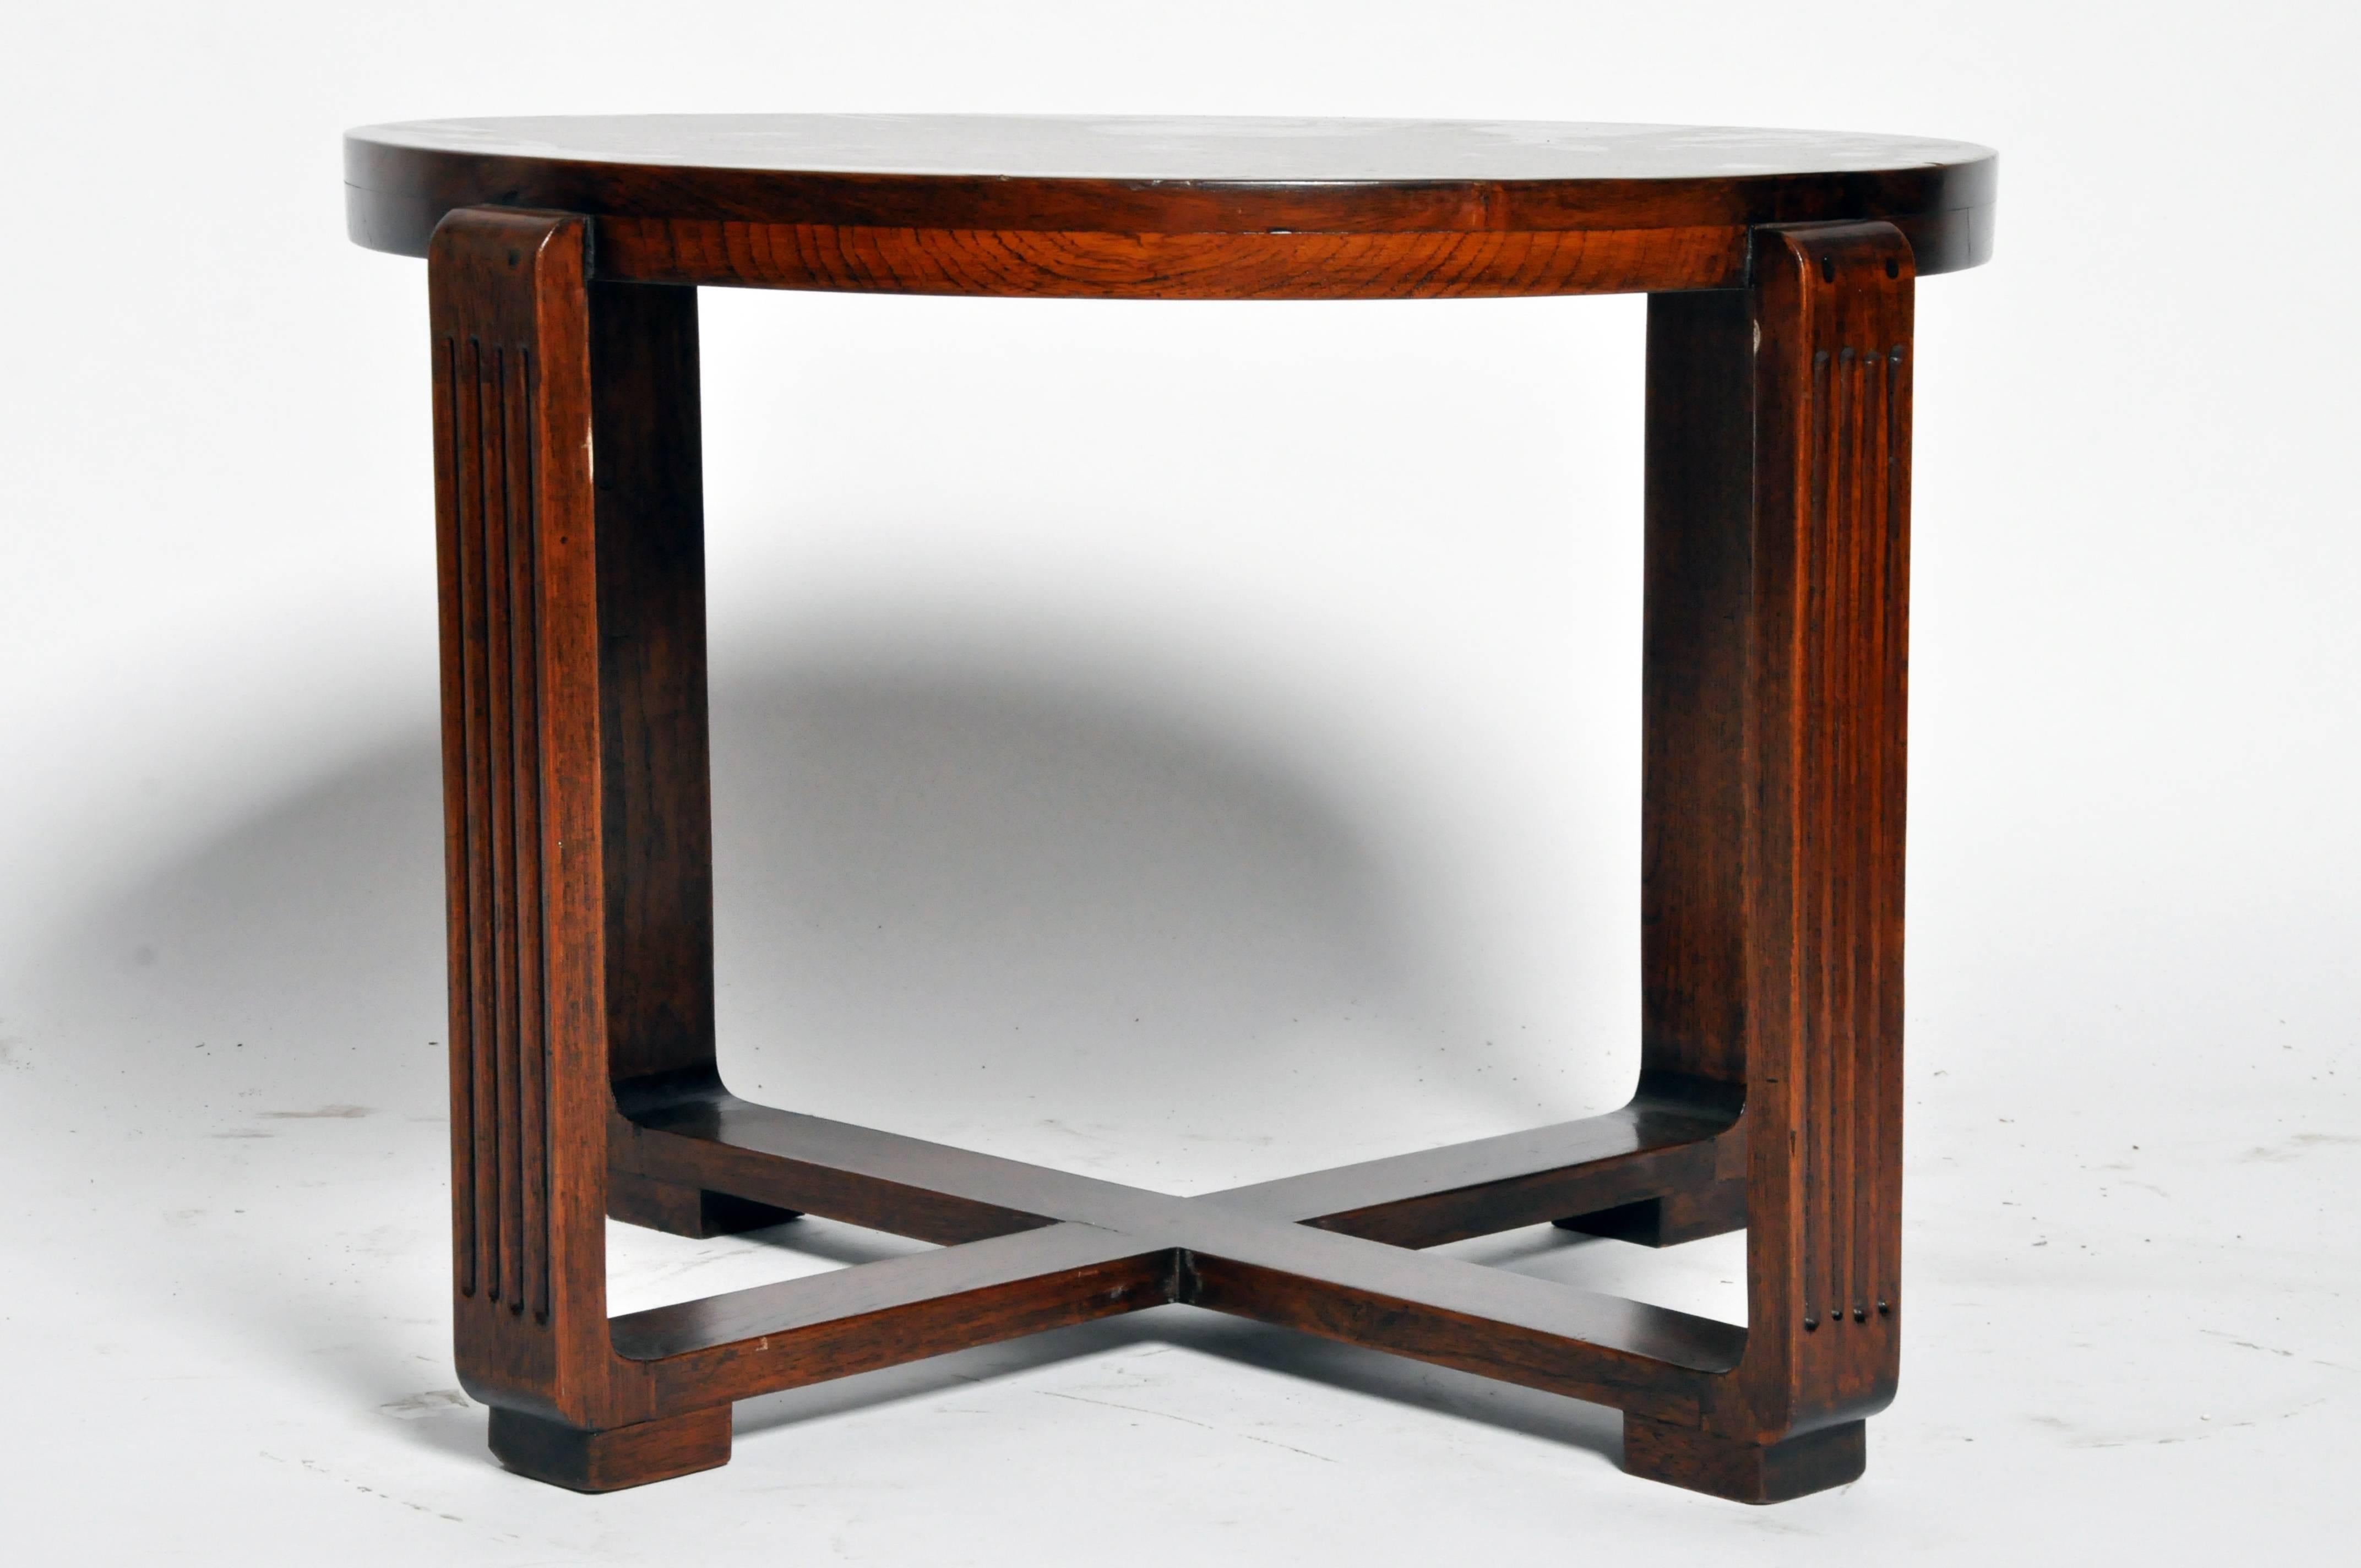 Burmese Art Deco Round Coffee Table with Four Nesting Tables